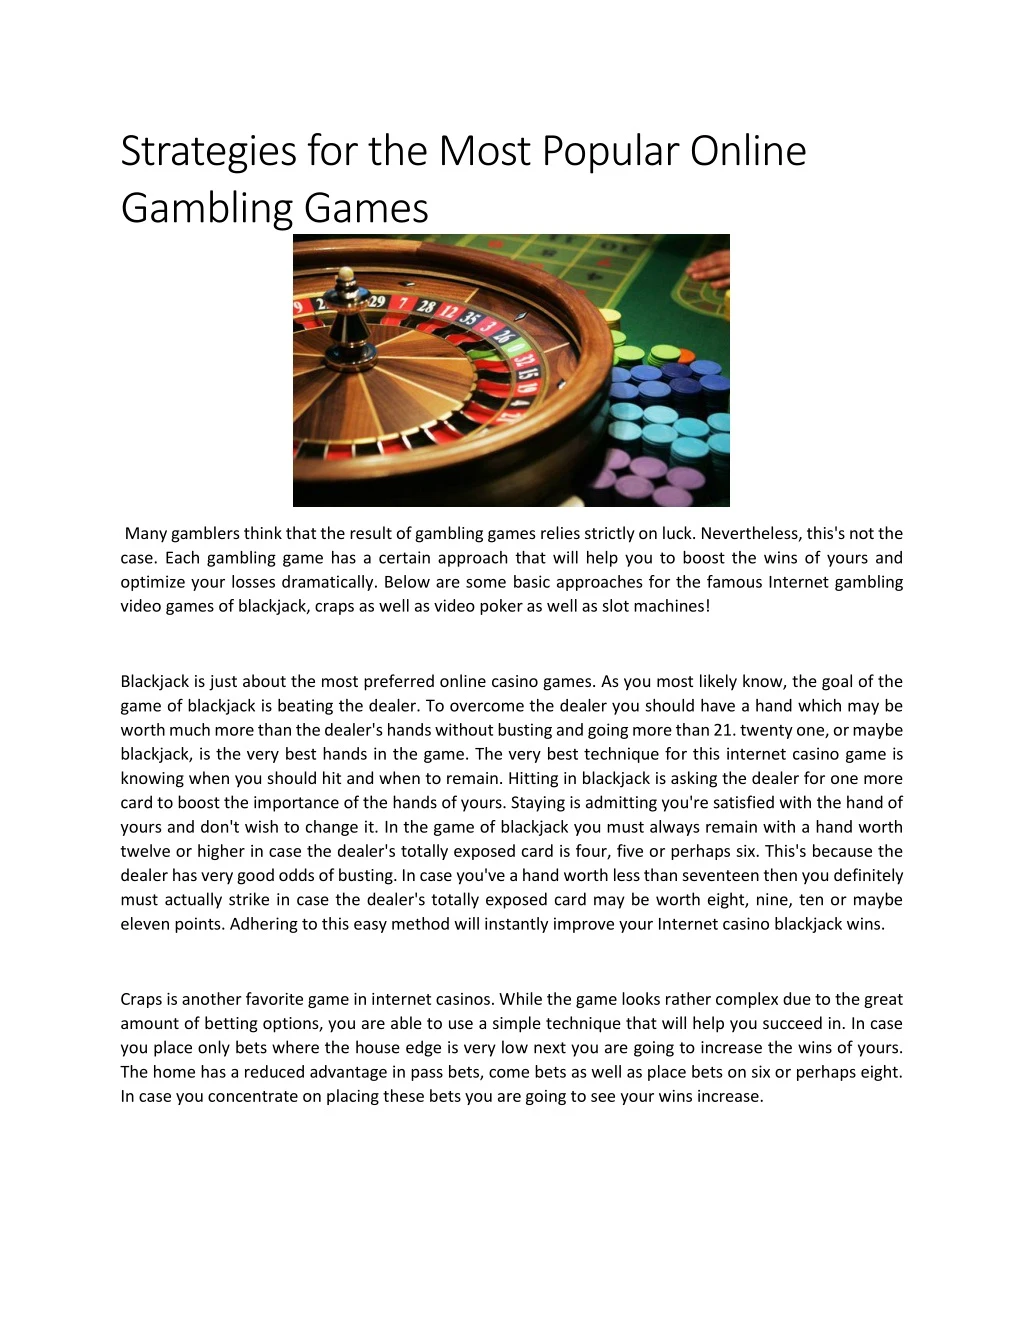 strategies for the most popular online gambling